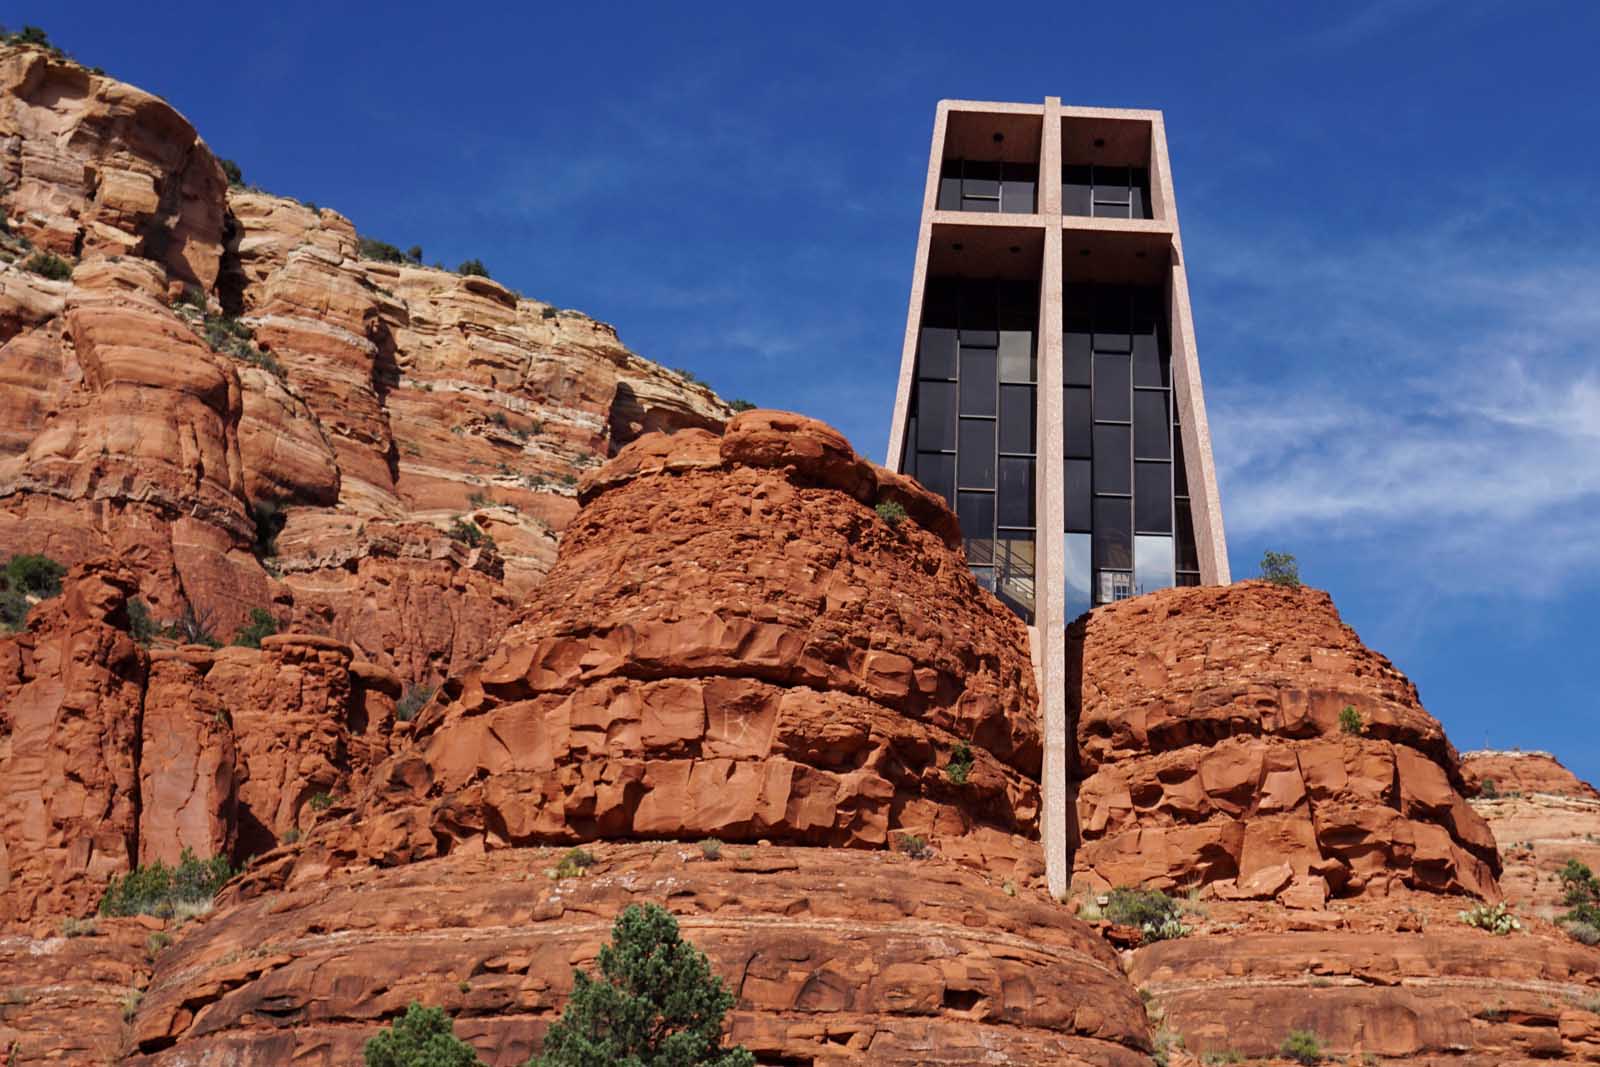 Things to see on drive from Phoenix to Sedona Chapel of the Holy Cross